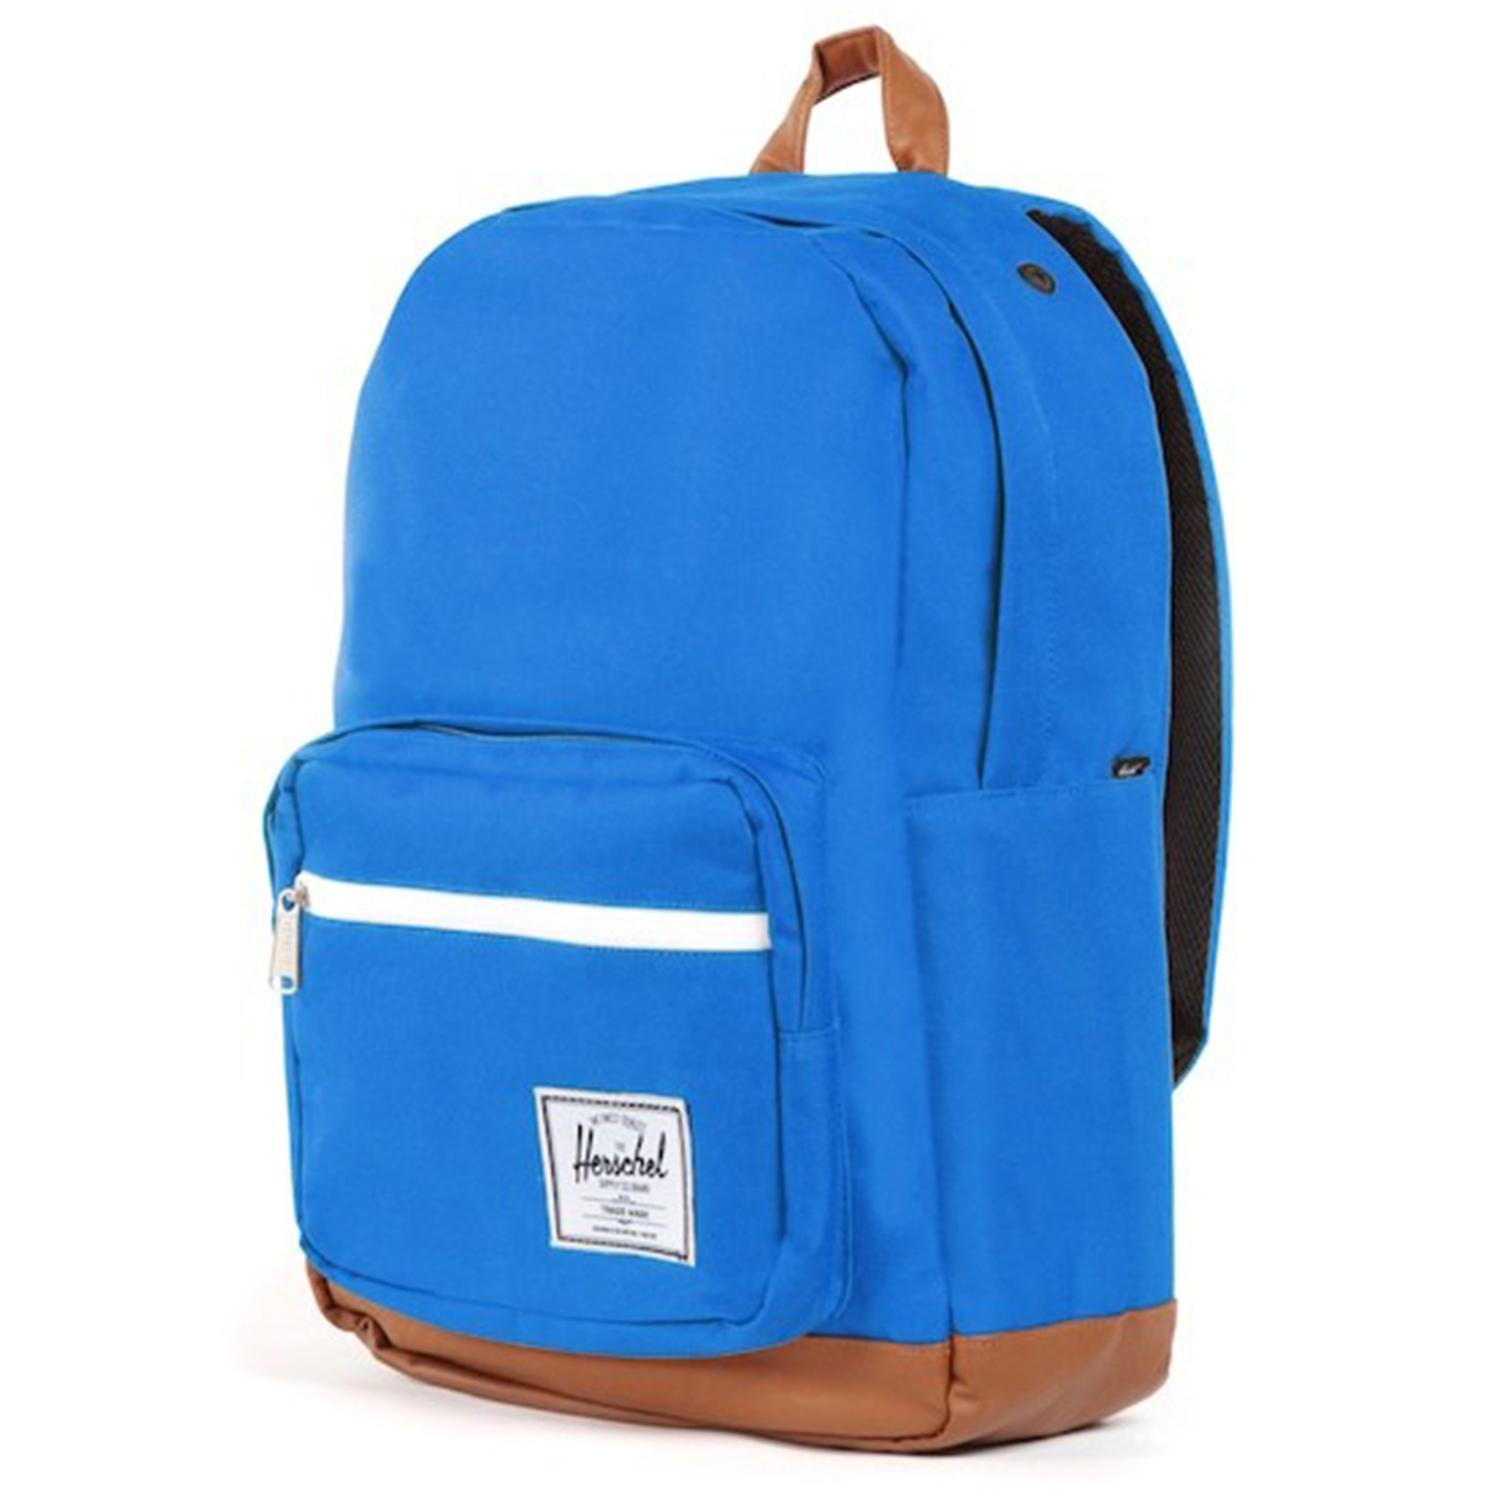 10 Awesome Back-to-School Backpacks